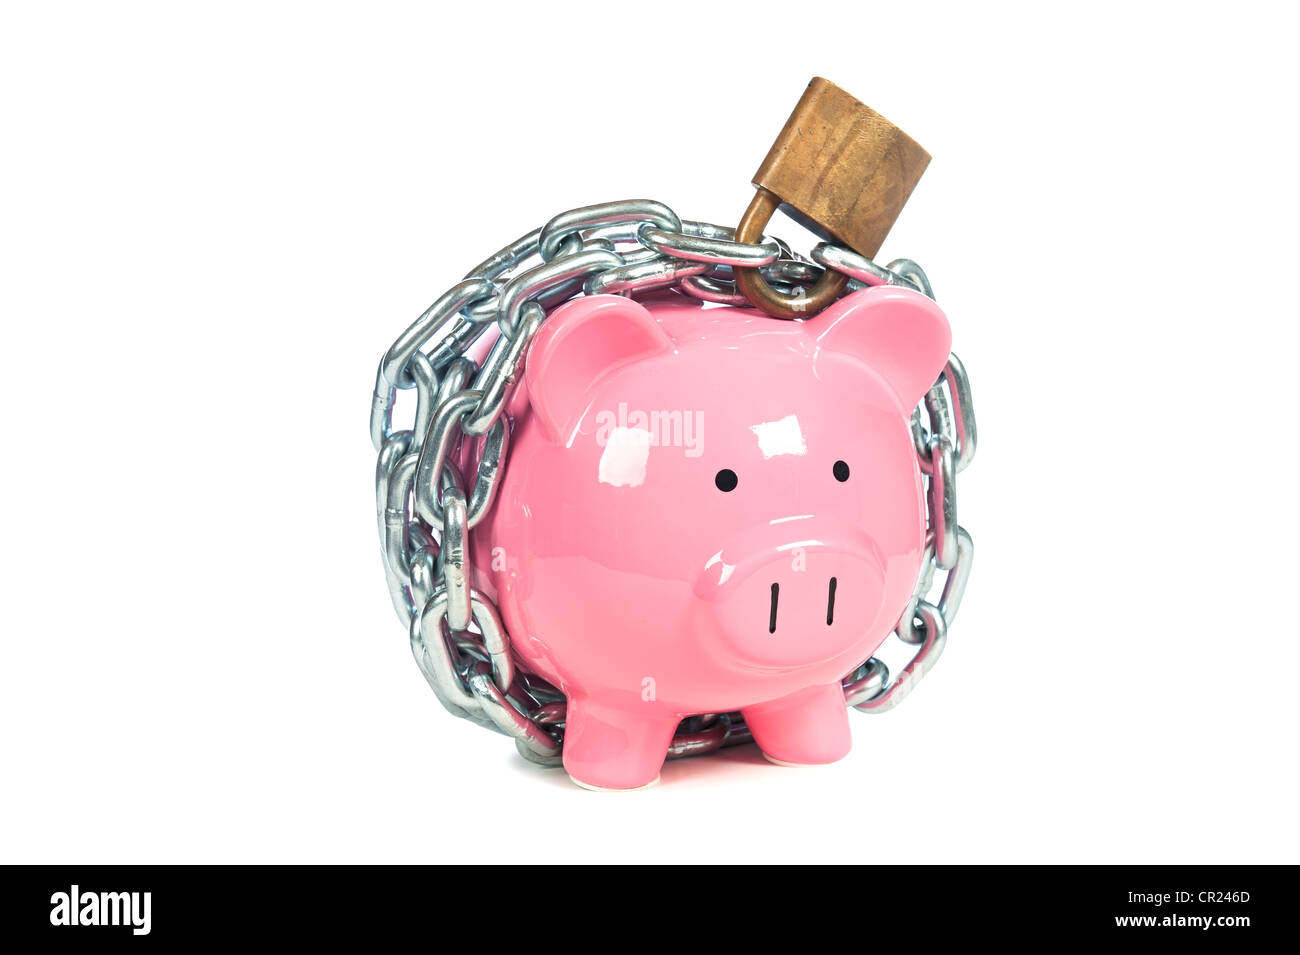 A pink piggybank chained up and locked. Image can be used for financial protection inferences or other investment messages. Stock Photo